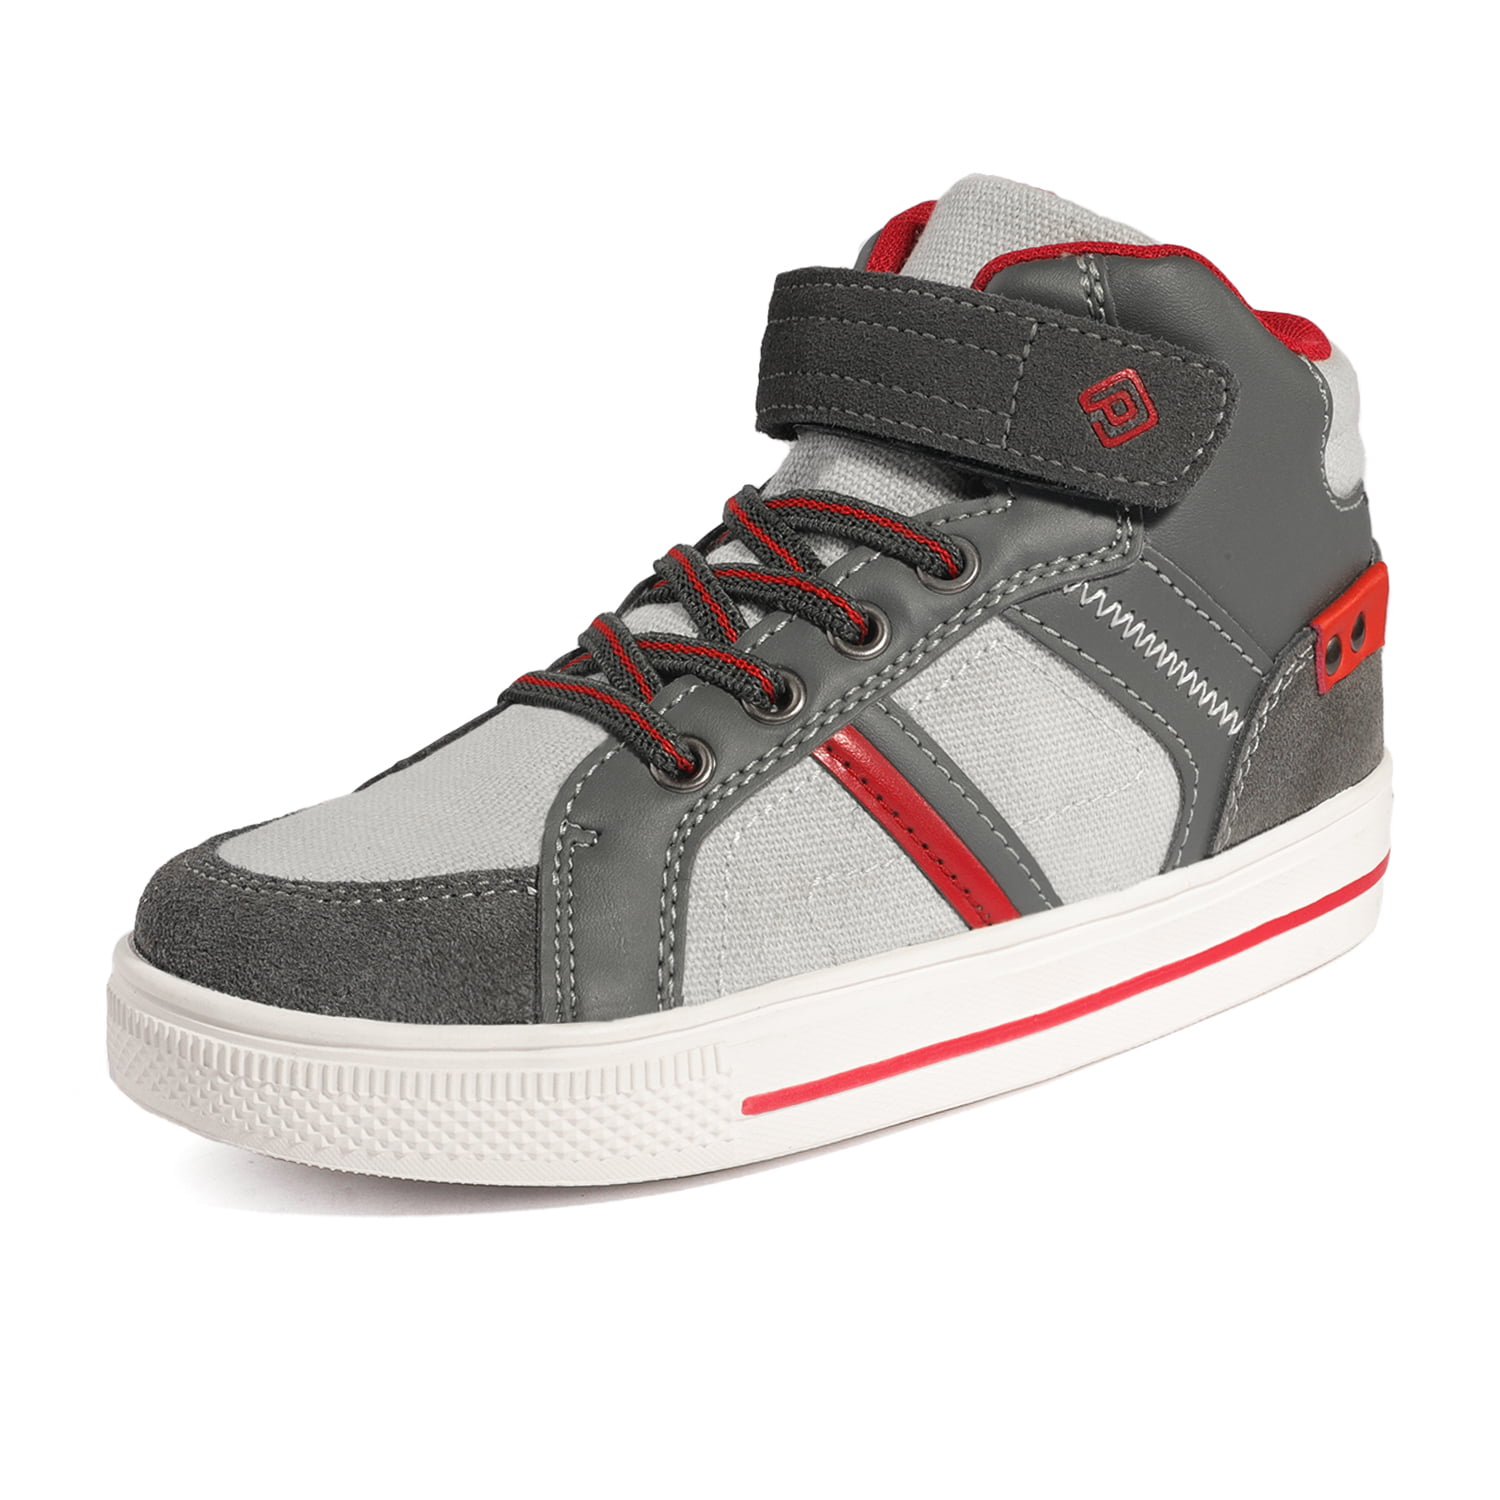 DREAM PAIRS Boys High Top Sneaker Shoes 151014_H GREY/RED Size 7 ...